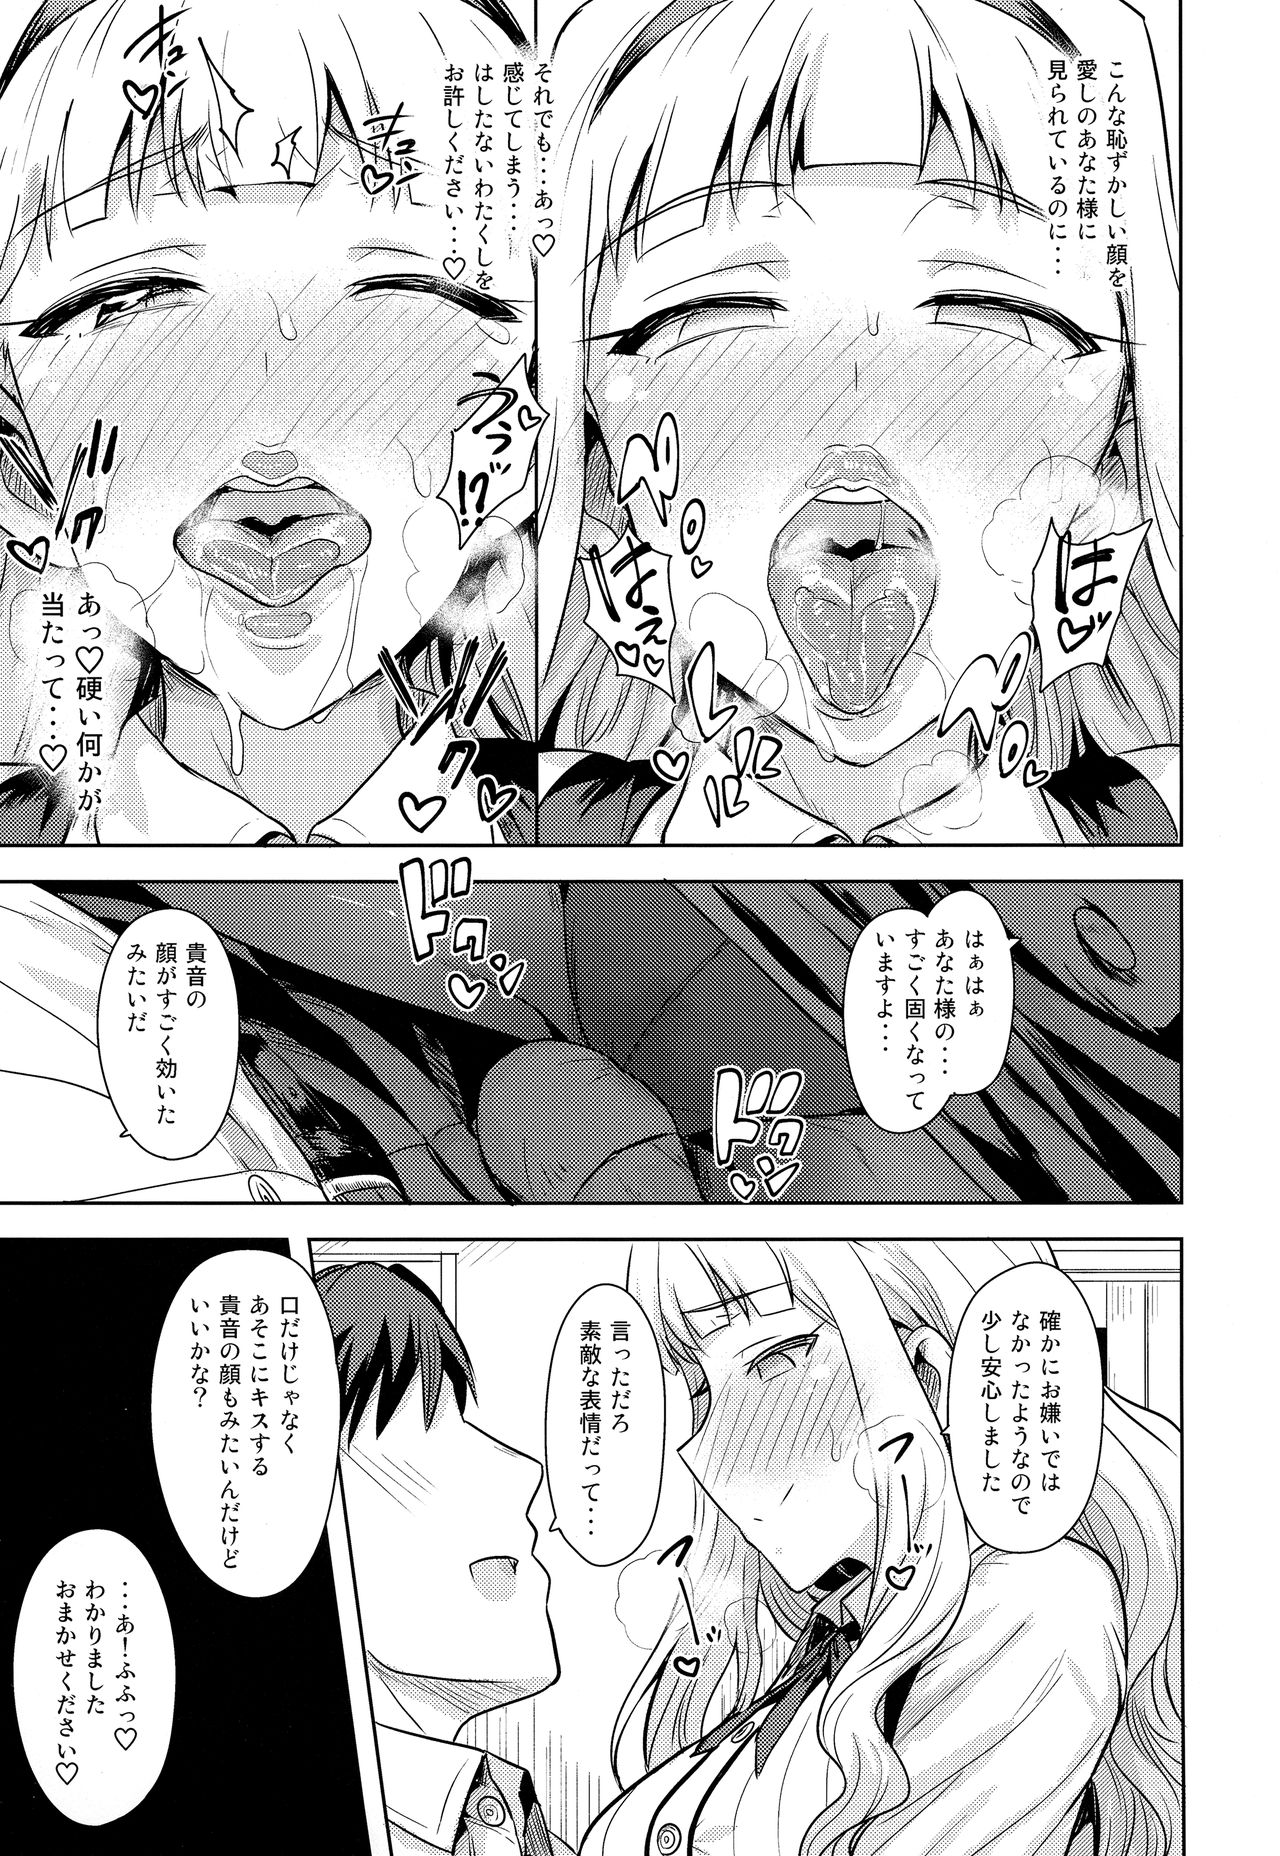 [PLANT (Tsurui)] SWEET MOON 2 (THE IDOLM@STER) page 12 full